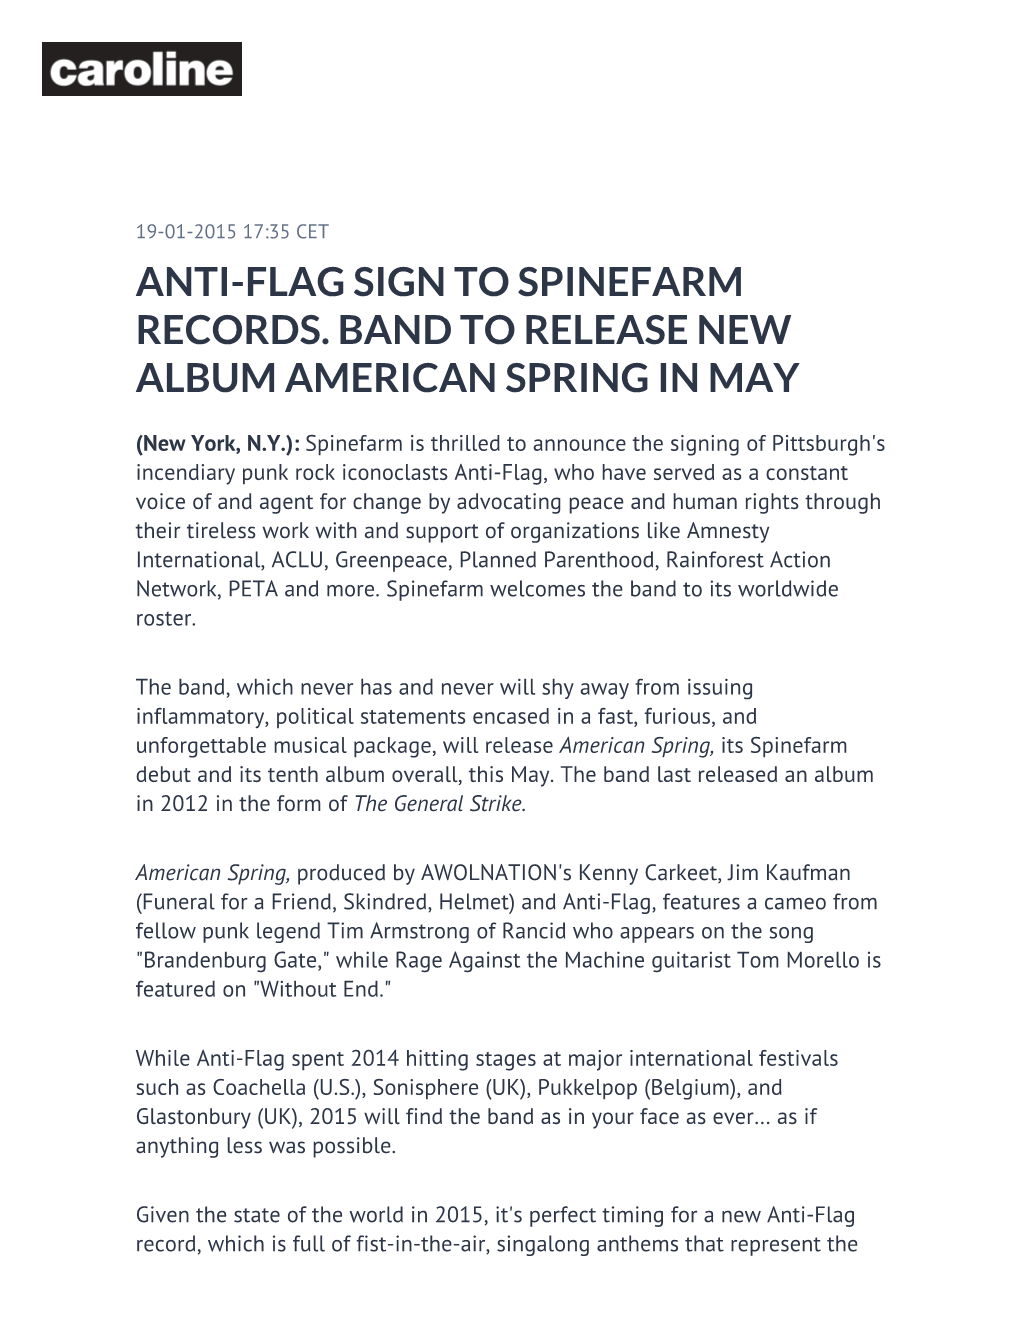 Anti-Flag Sign to Spinefarm Records. Band to Release New Album American Spring in May